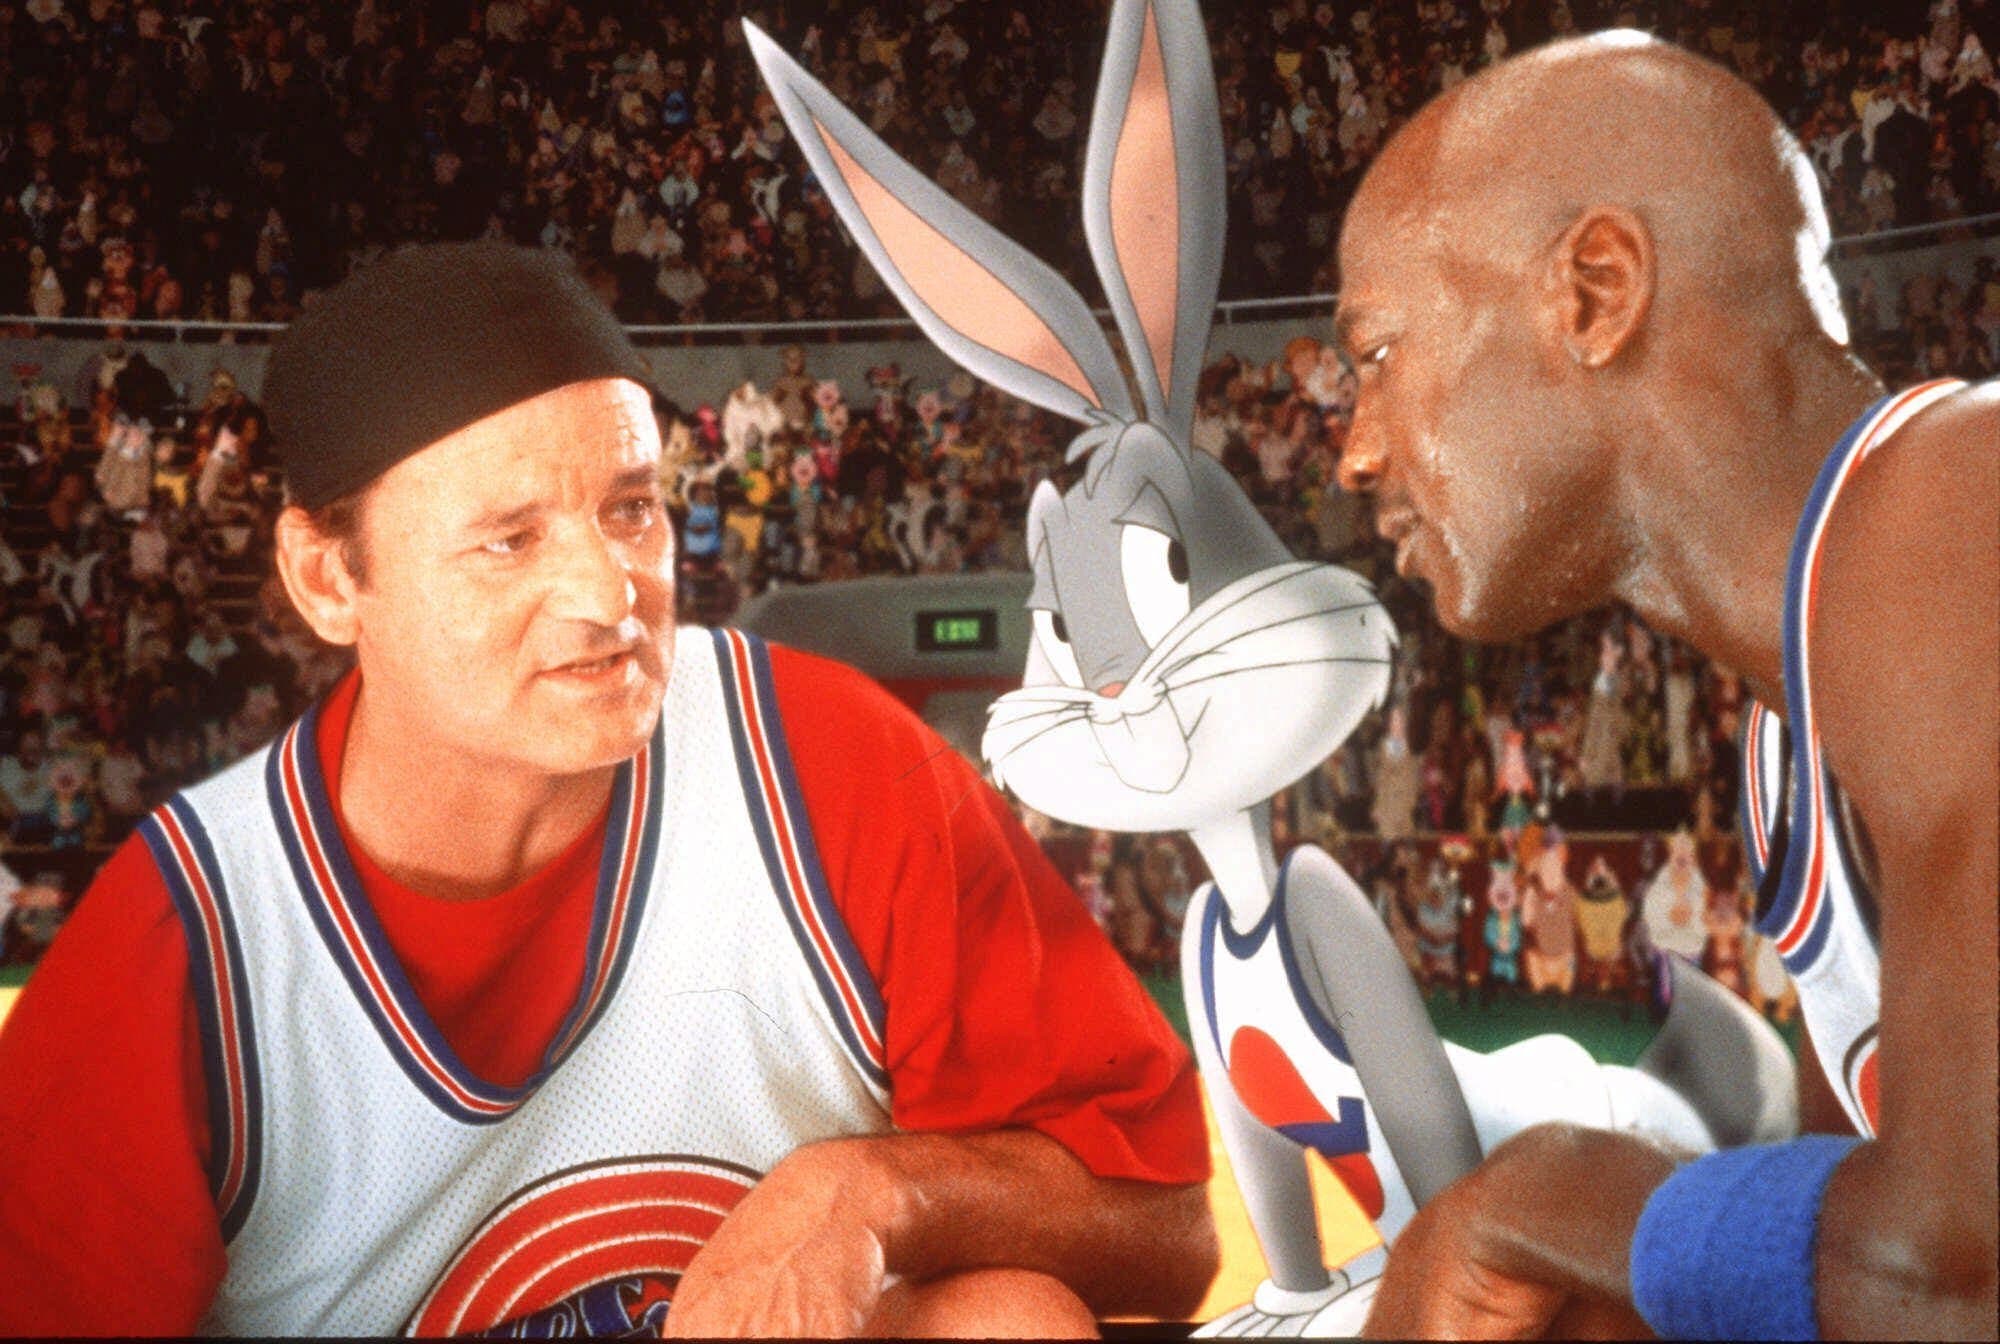 Bill Murray shares a memorable time that he had with the GOAT, Michael Jordan.